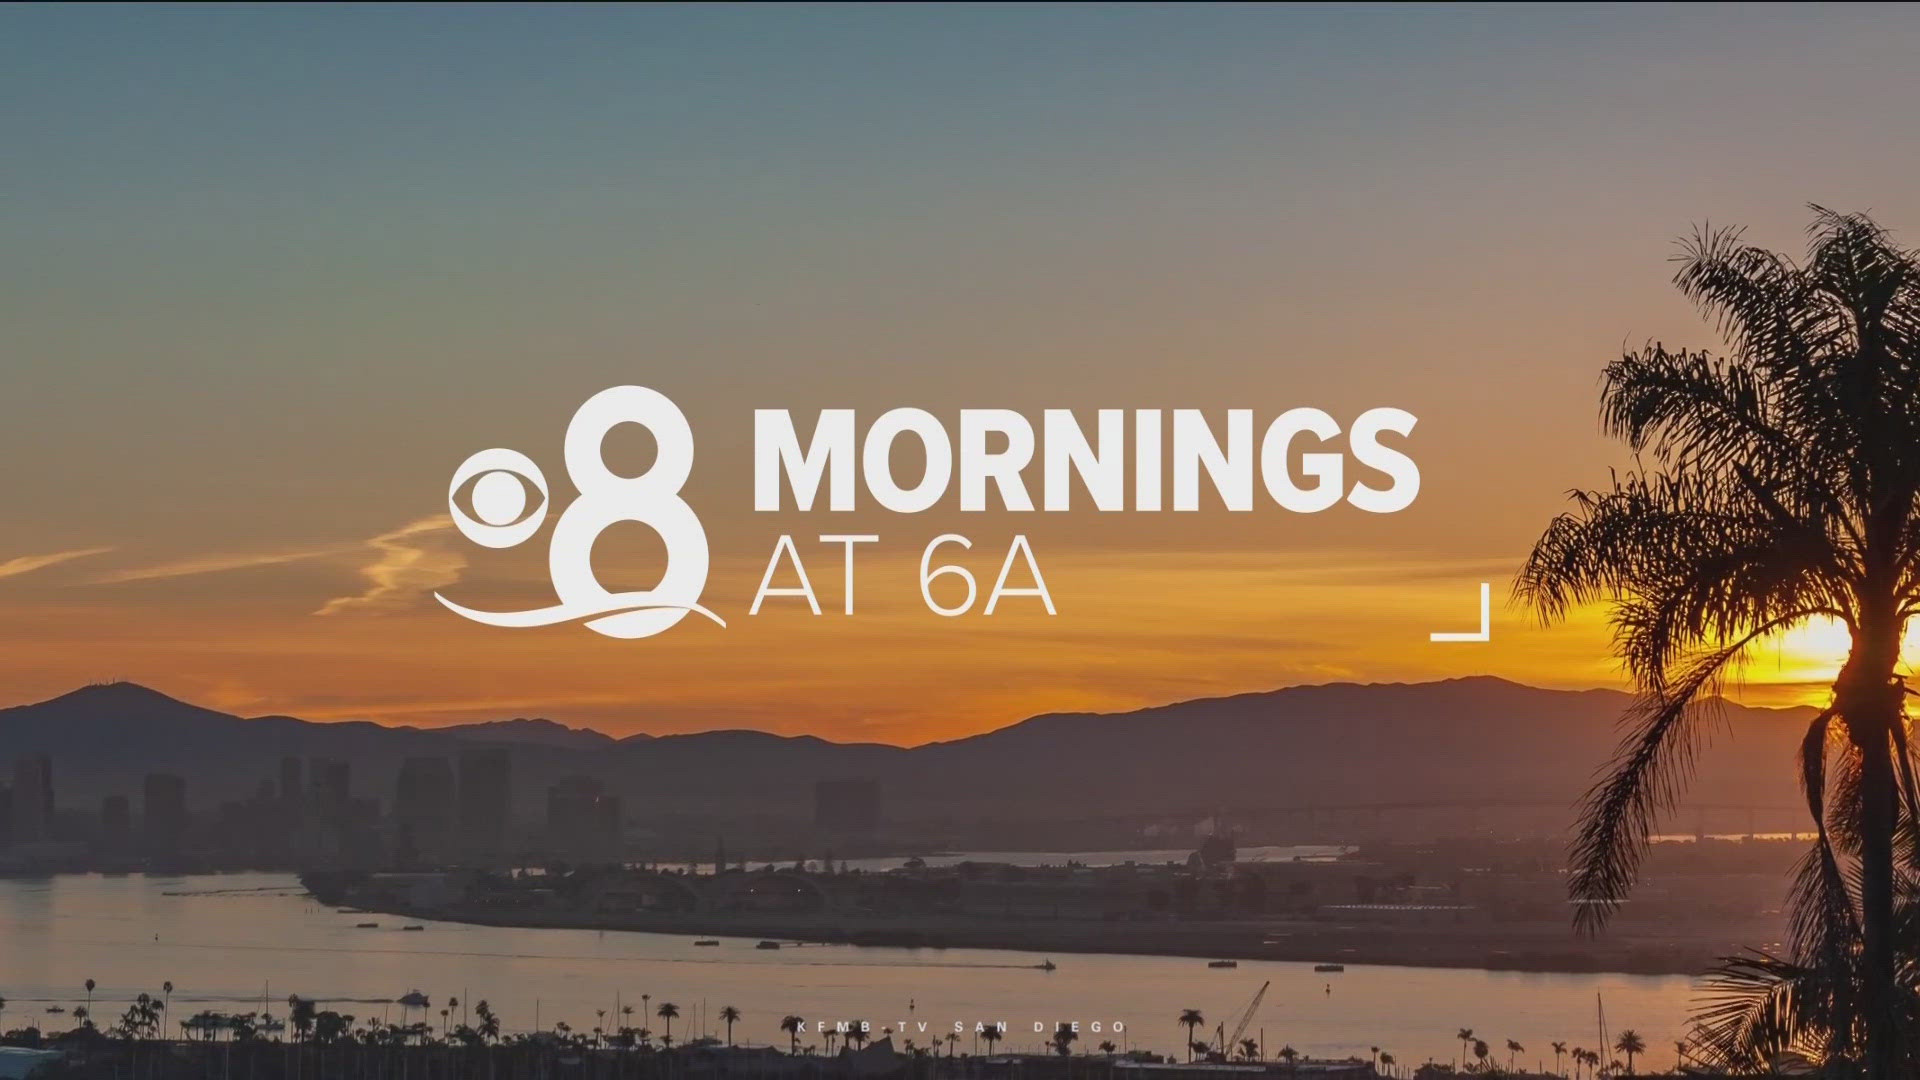 Here are the top stories around San Diego County for the morning of Thursday, May 2.
For the latest news, weather and sports, head to:
https://www.cbs8.com/